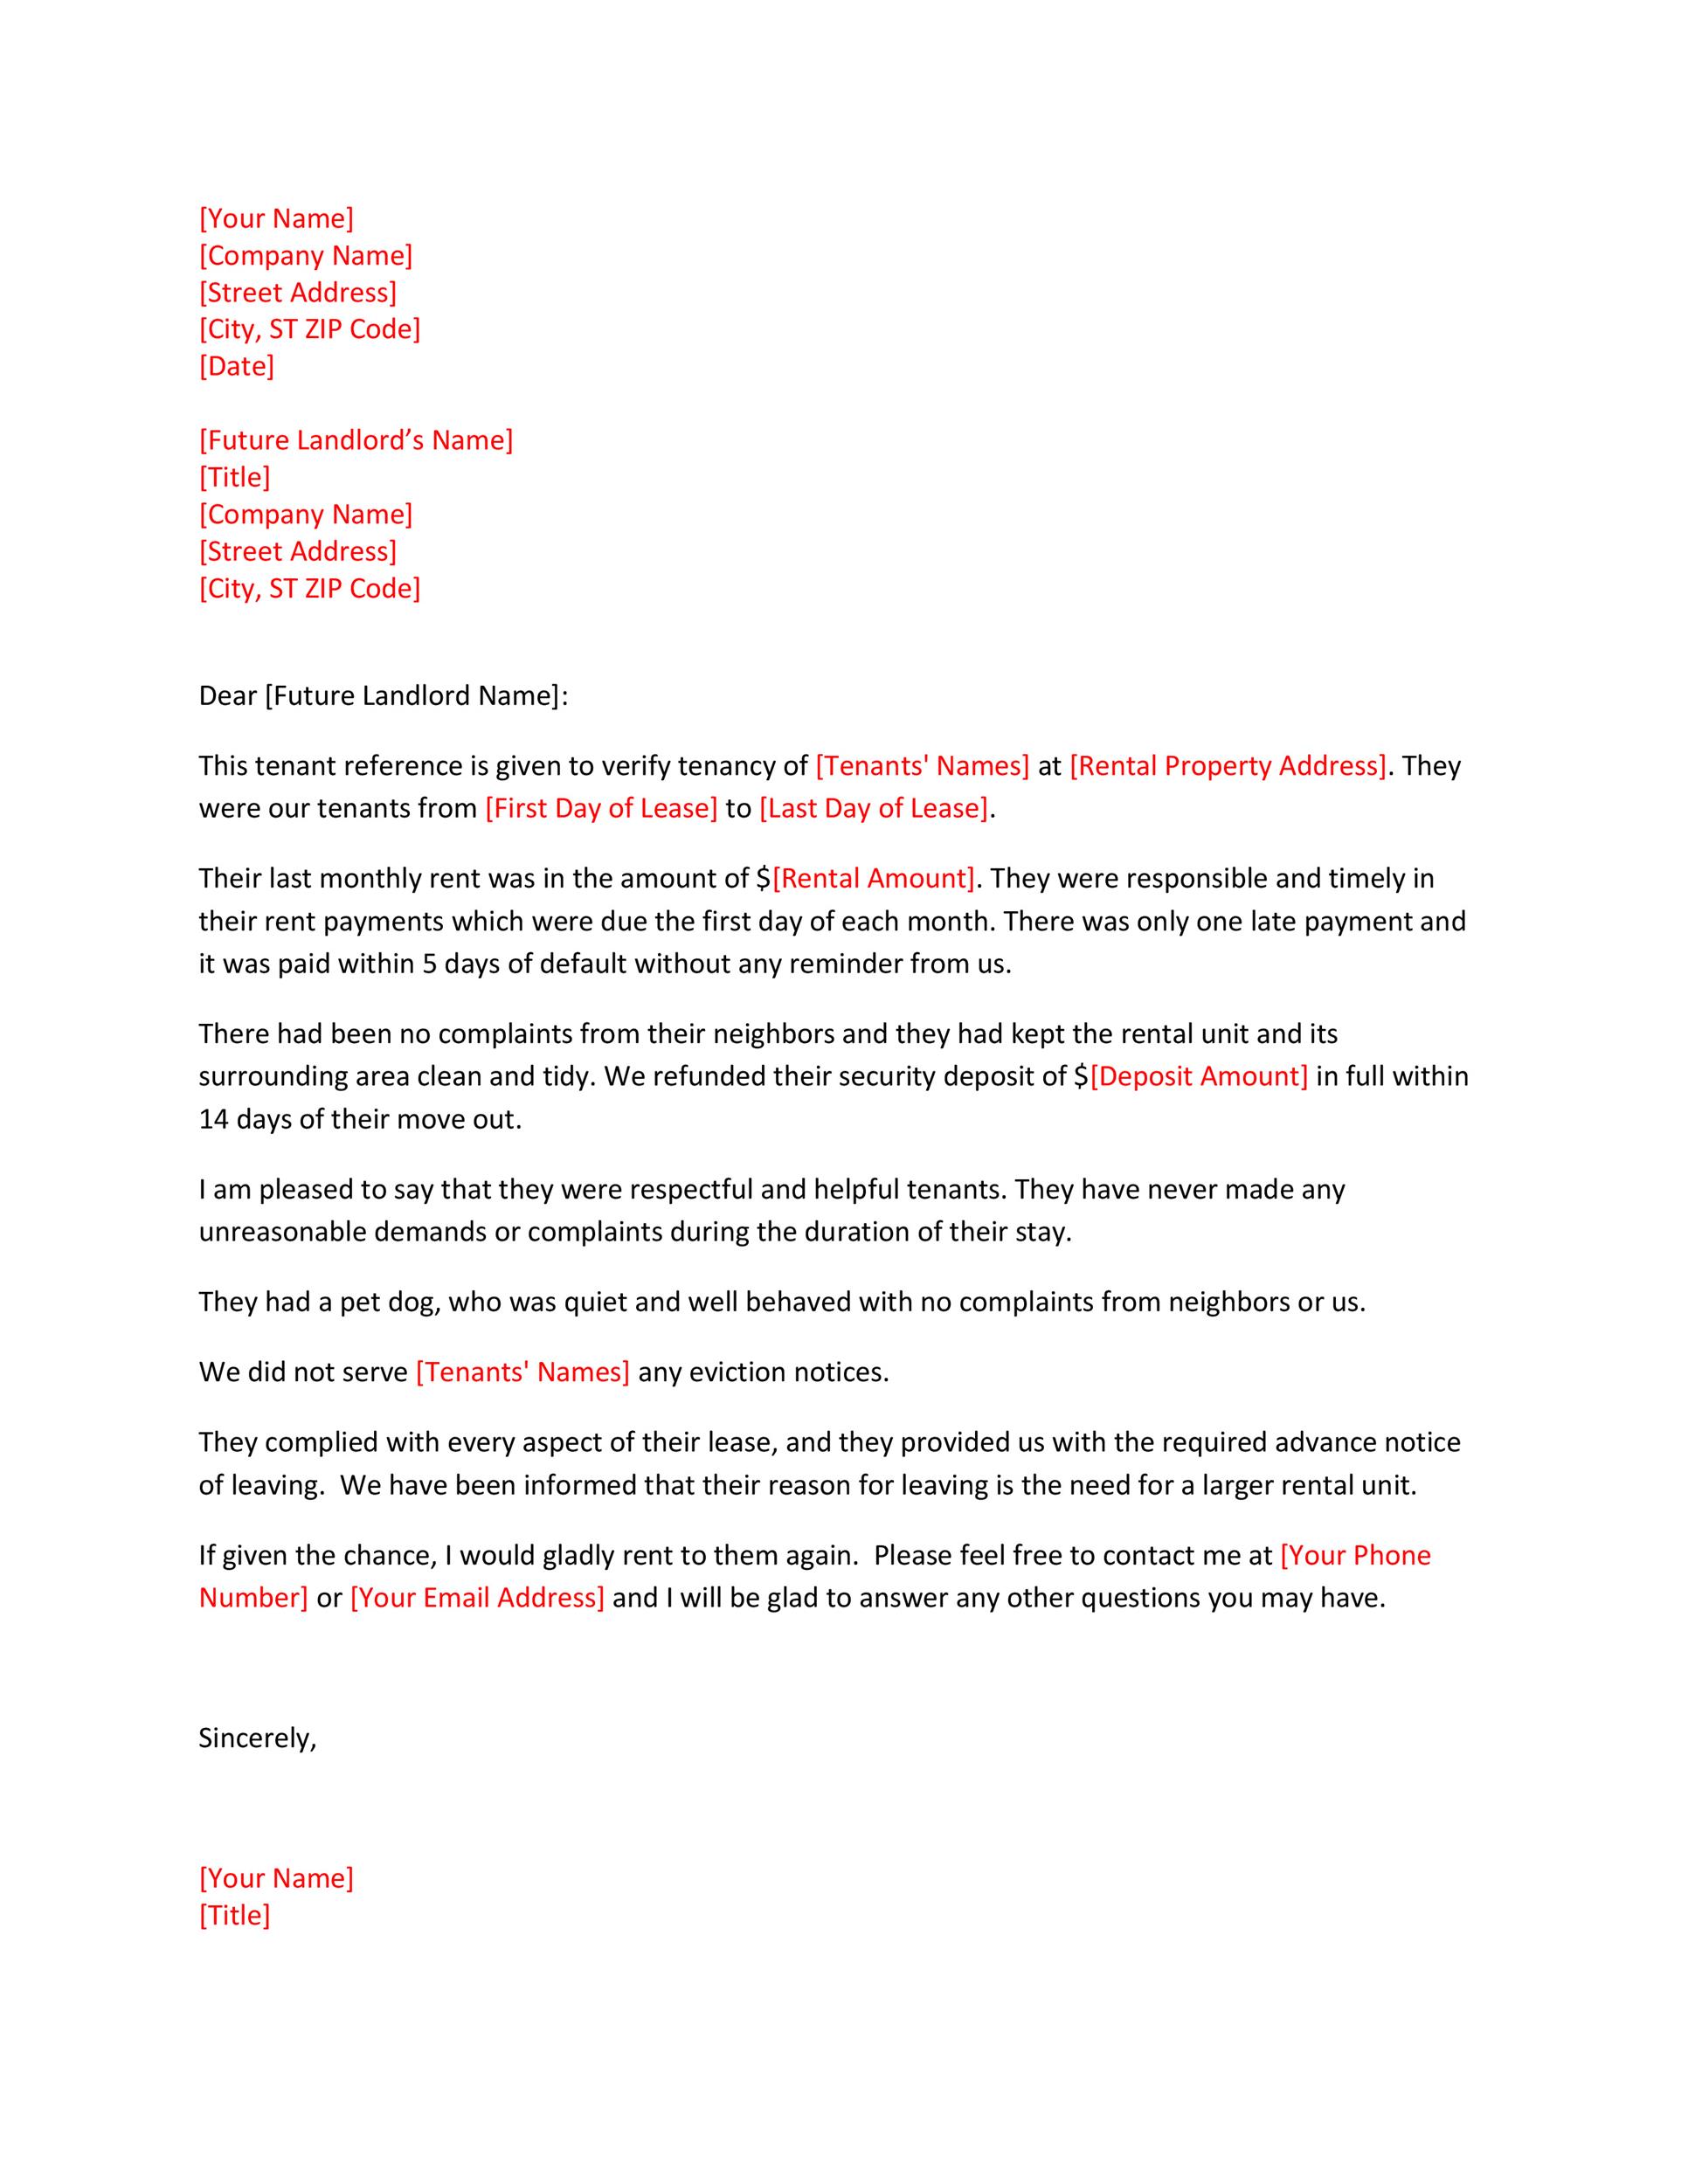 Free landlord reference letter 06